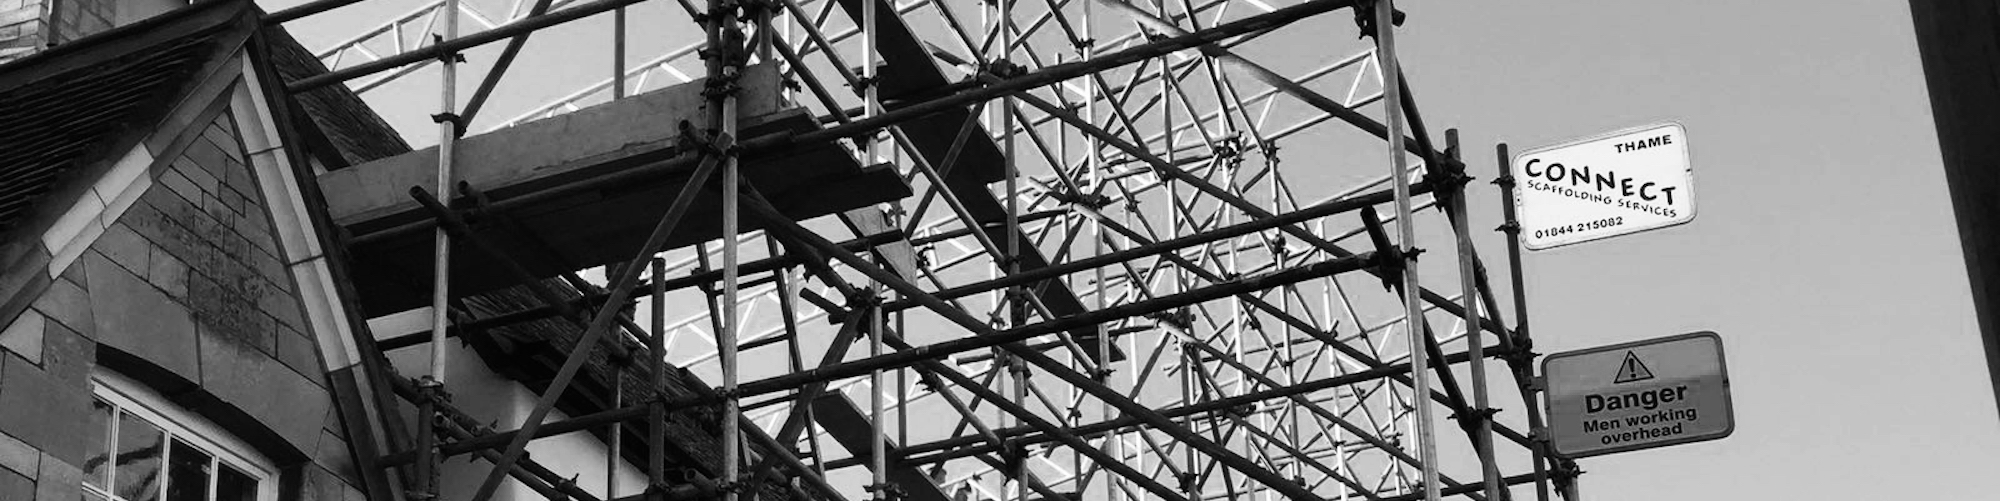 Scaffolding from below - Connect Scaffolding Services in Thame, Oxfordshire